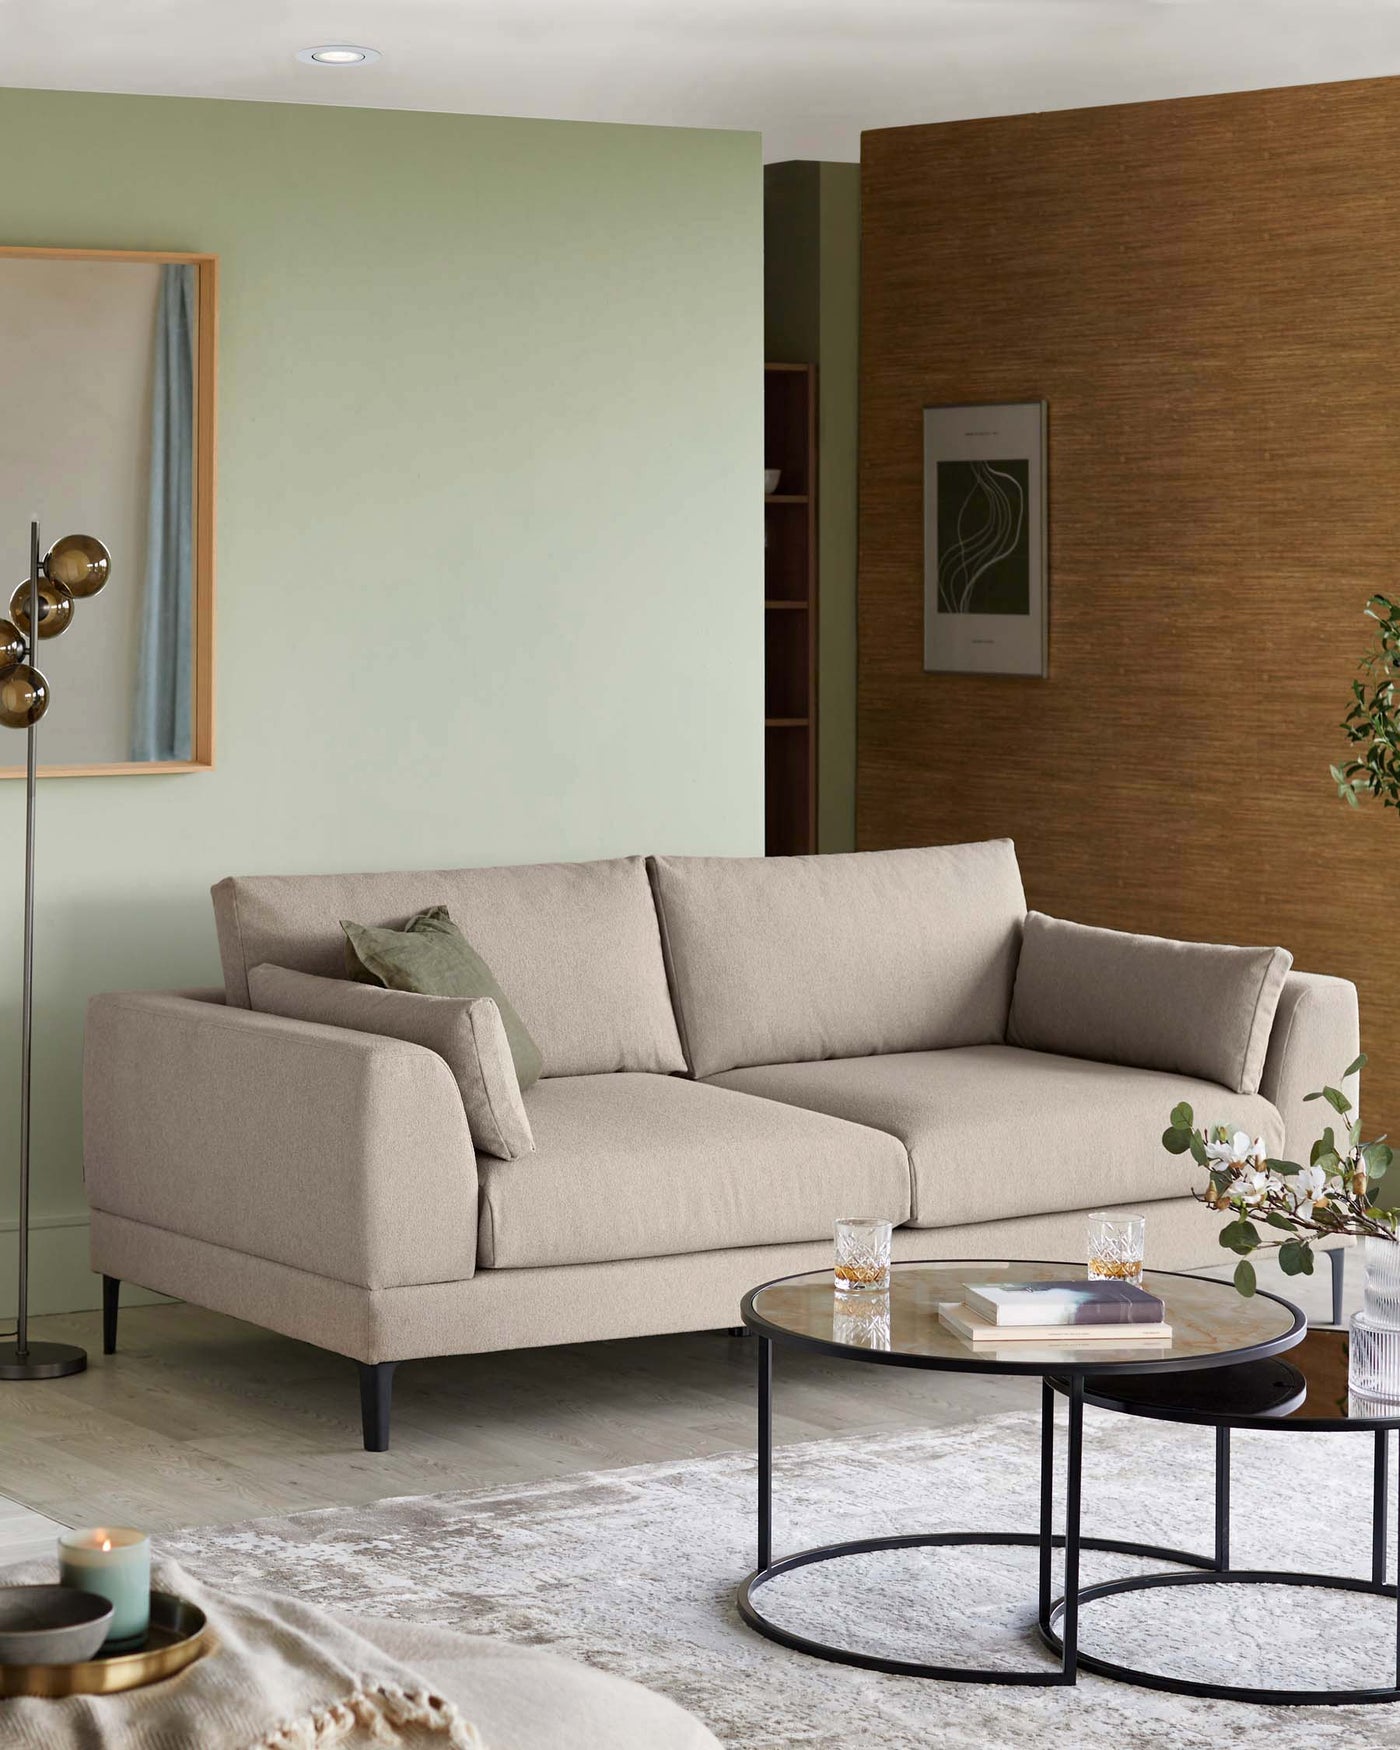 A contemporary beige sectional sofa with clean lines and dark tapered legs. In front of it is a round coffee table featuring a black metal frame with a glass top.